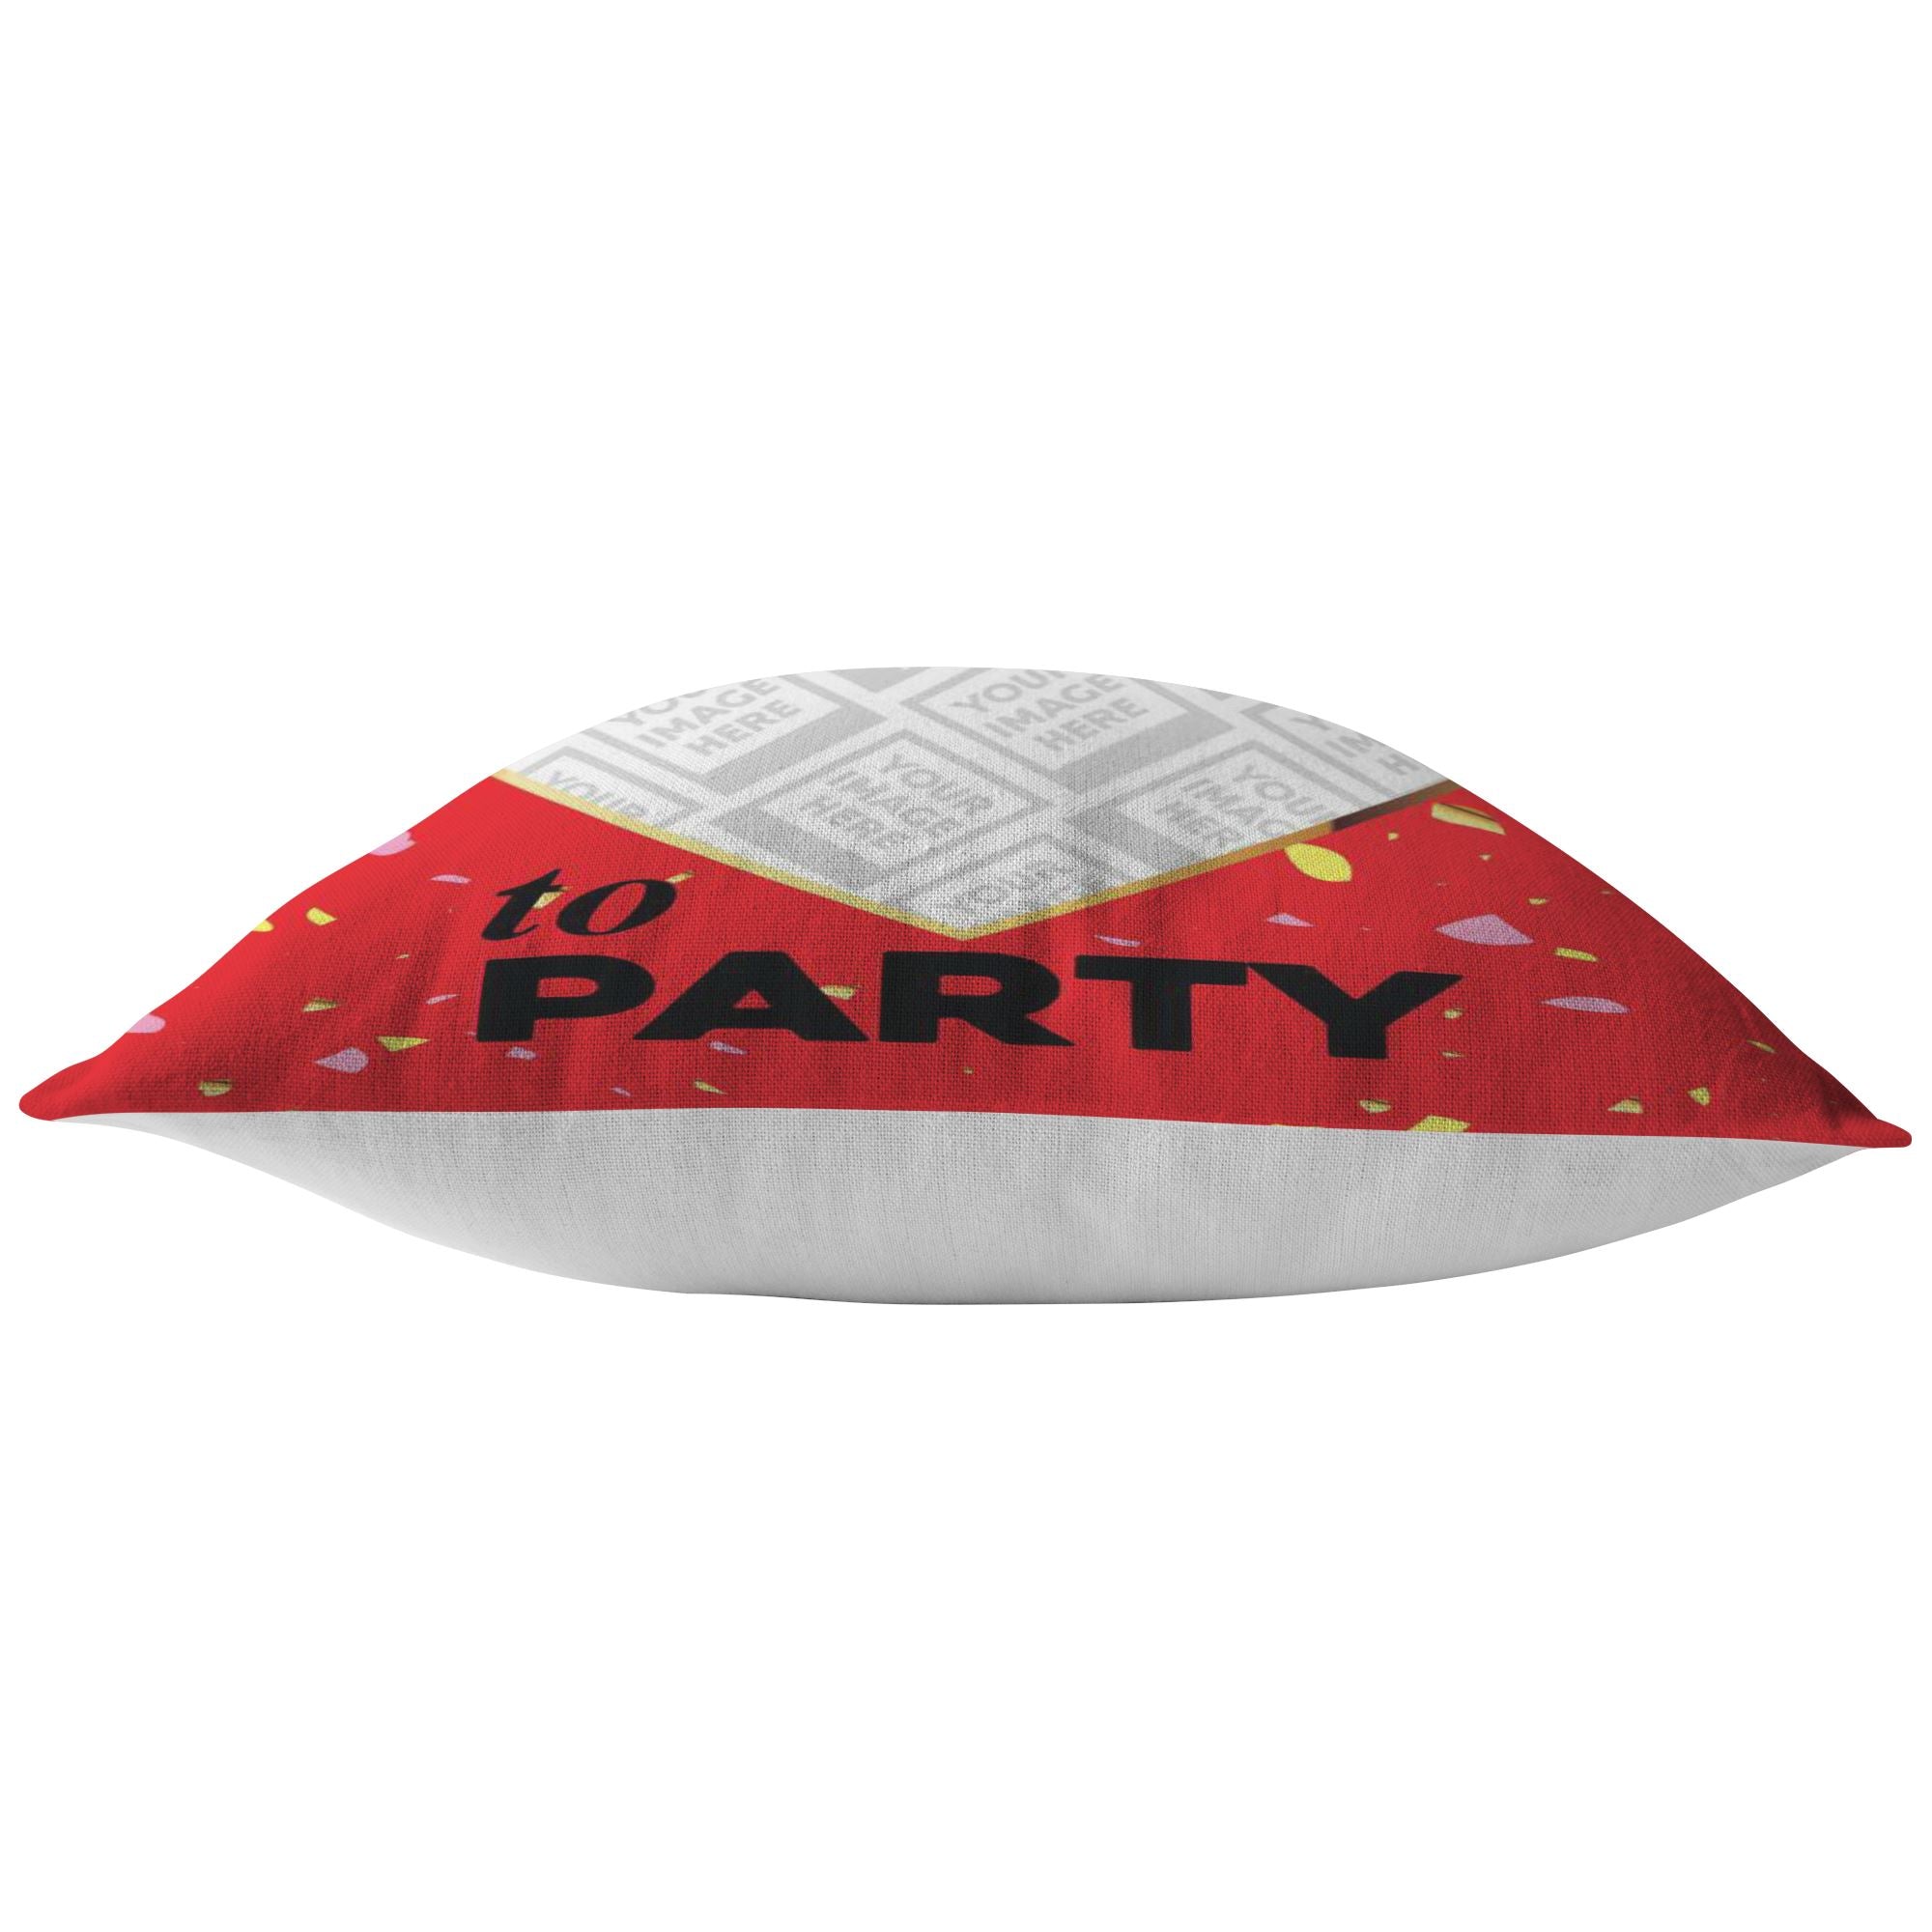 Personalized Pillow | We Love To Party | Upload Your Own Picture! - Houseboat Kings